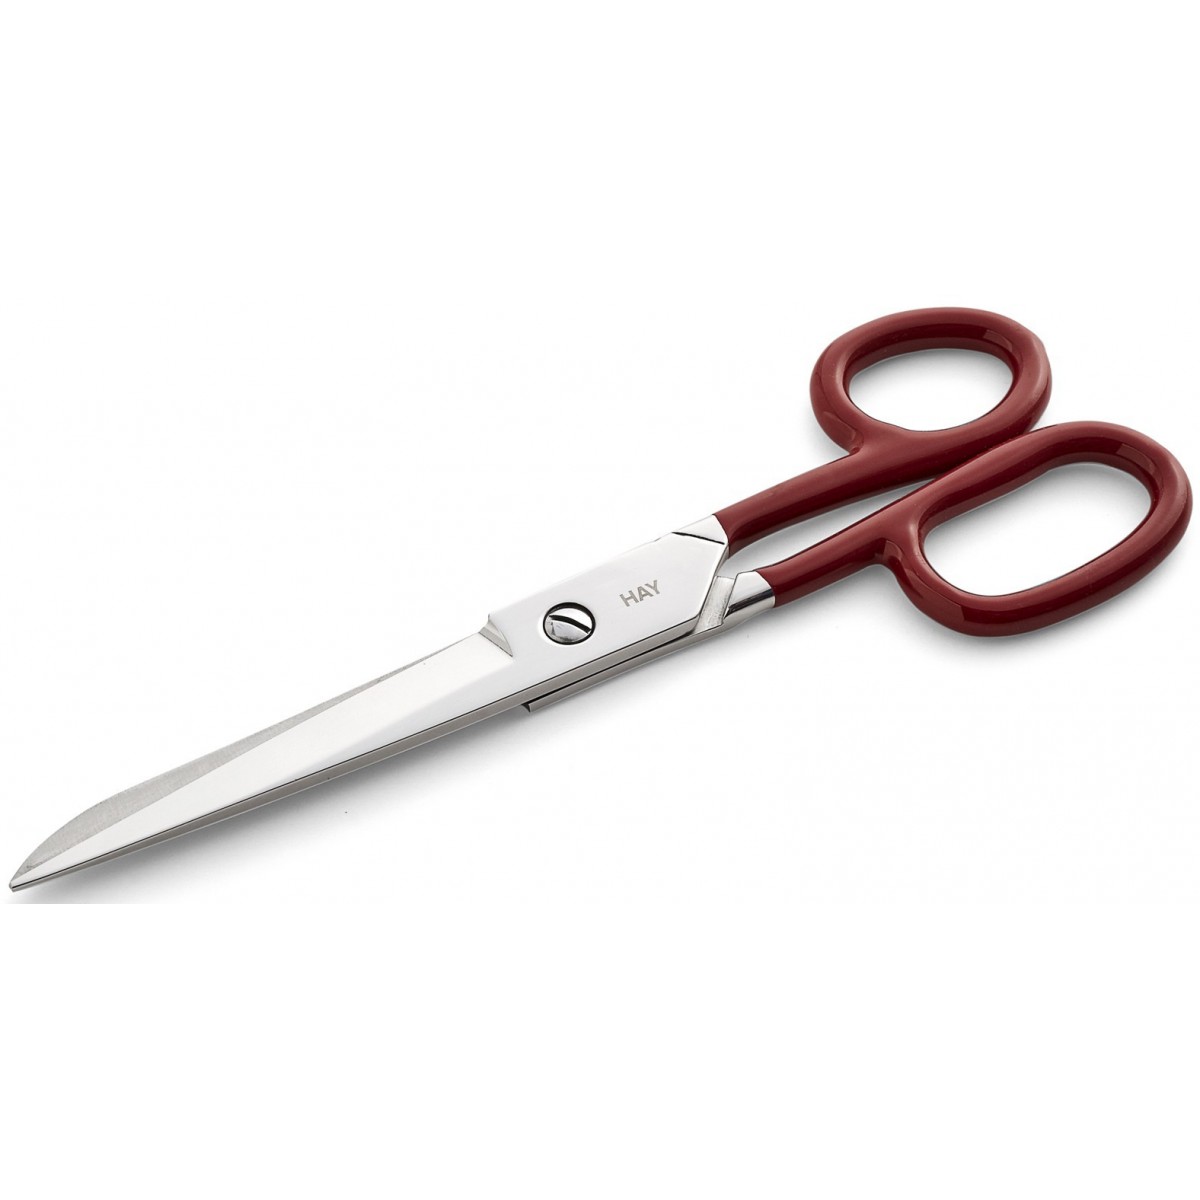 SOLS OUT - red - Grip scissors